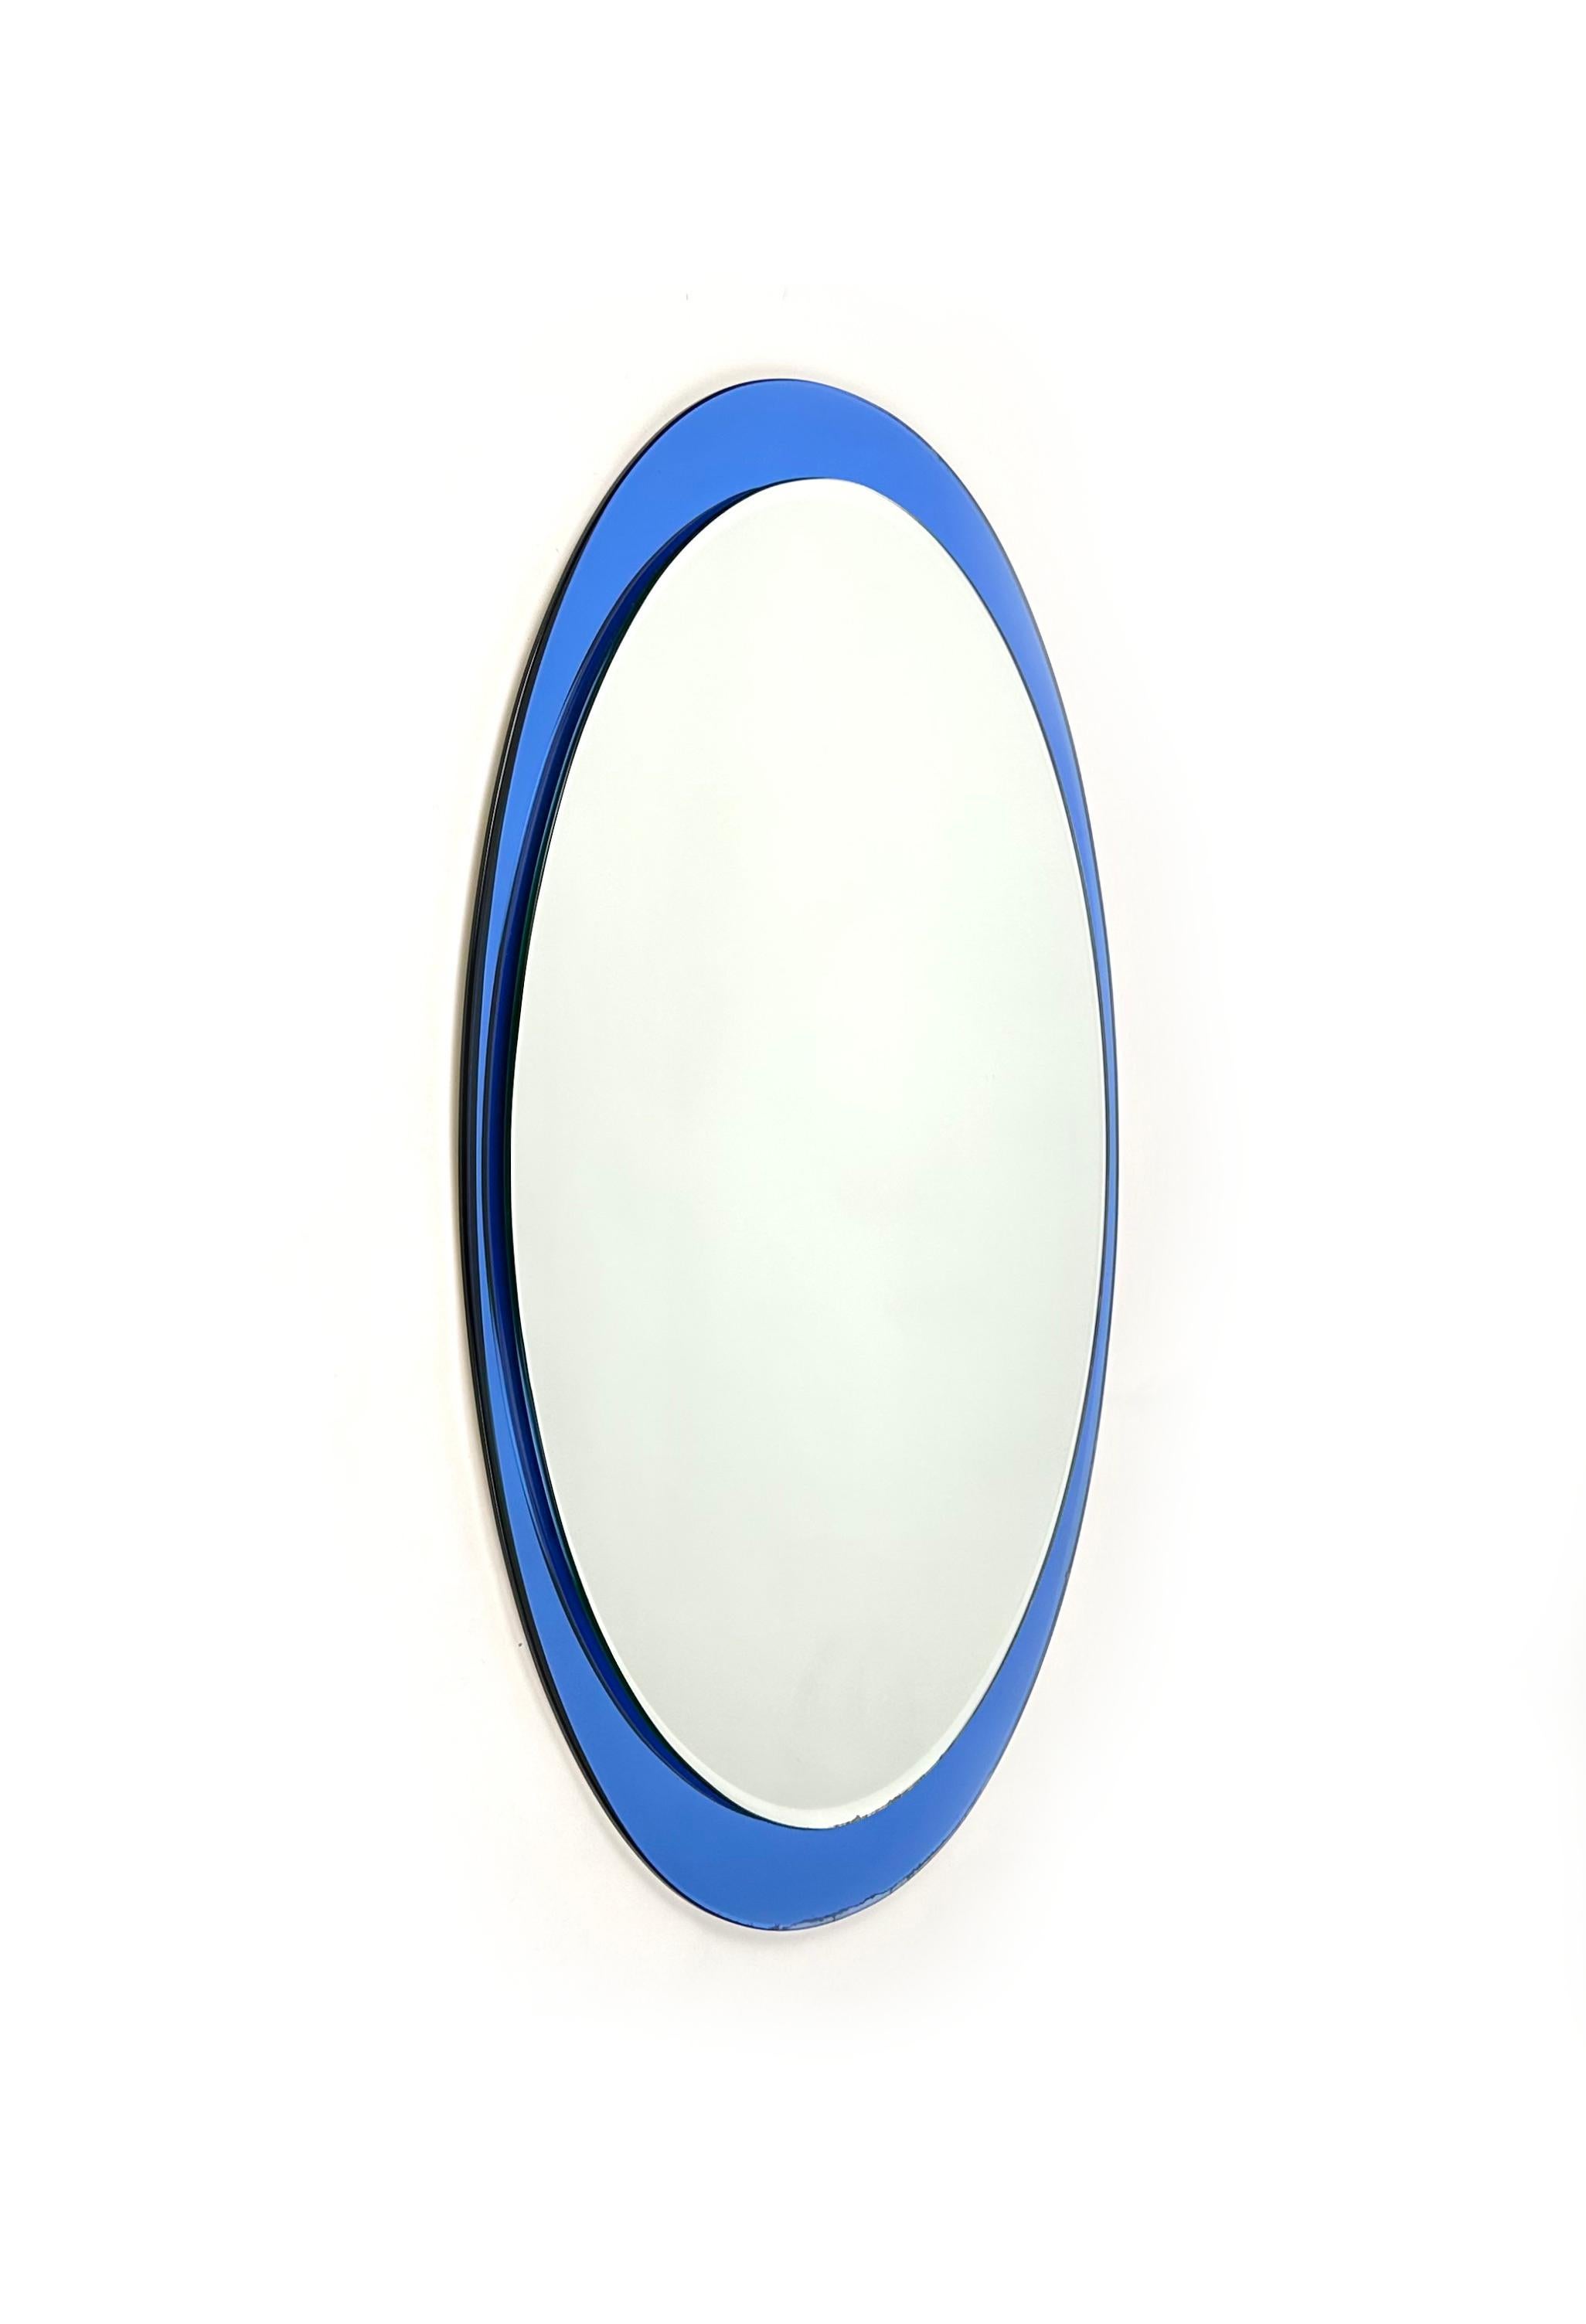 Midcentury oval wall mirror with blue mirror frame and double decreasing beveled by Metalvetro Galvorame. 

Made in Italy in the 1970s. 

It comes with its original label signed 